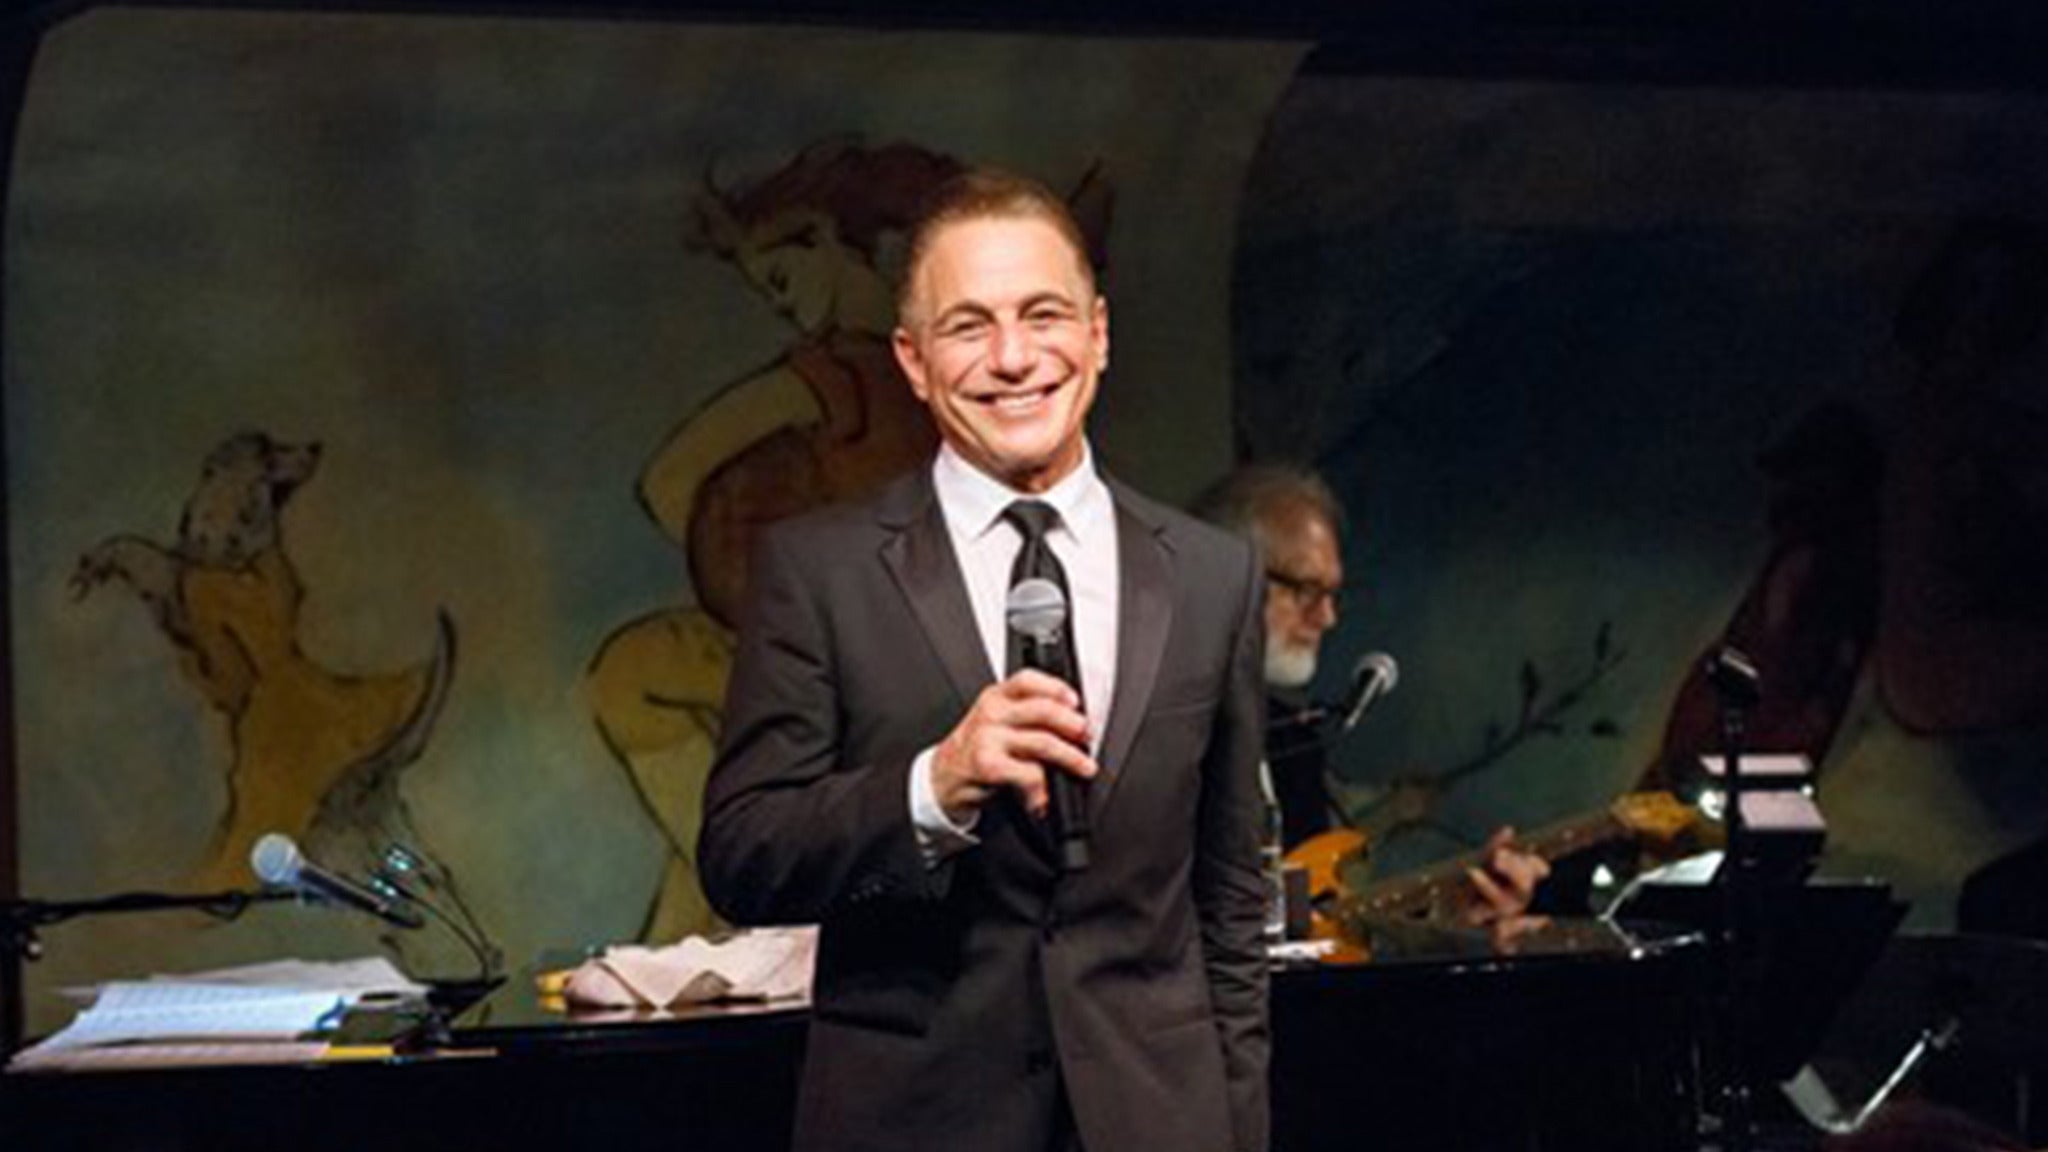 Tony Danza: Standards And Stories pre-sale code